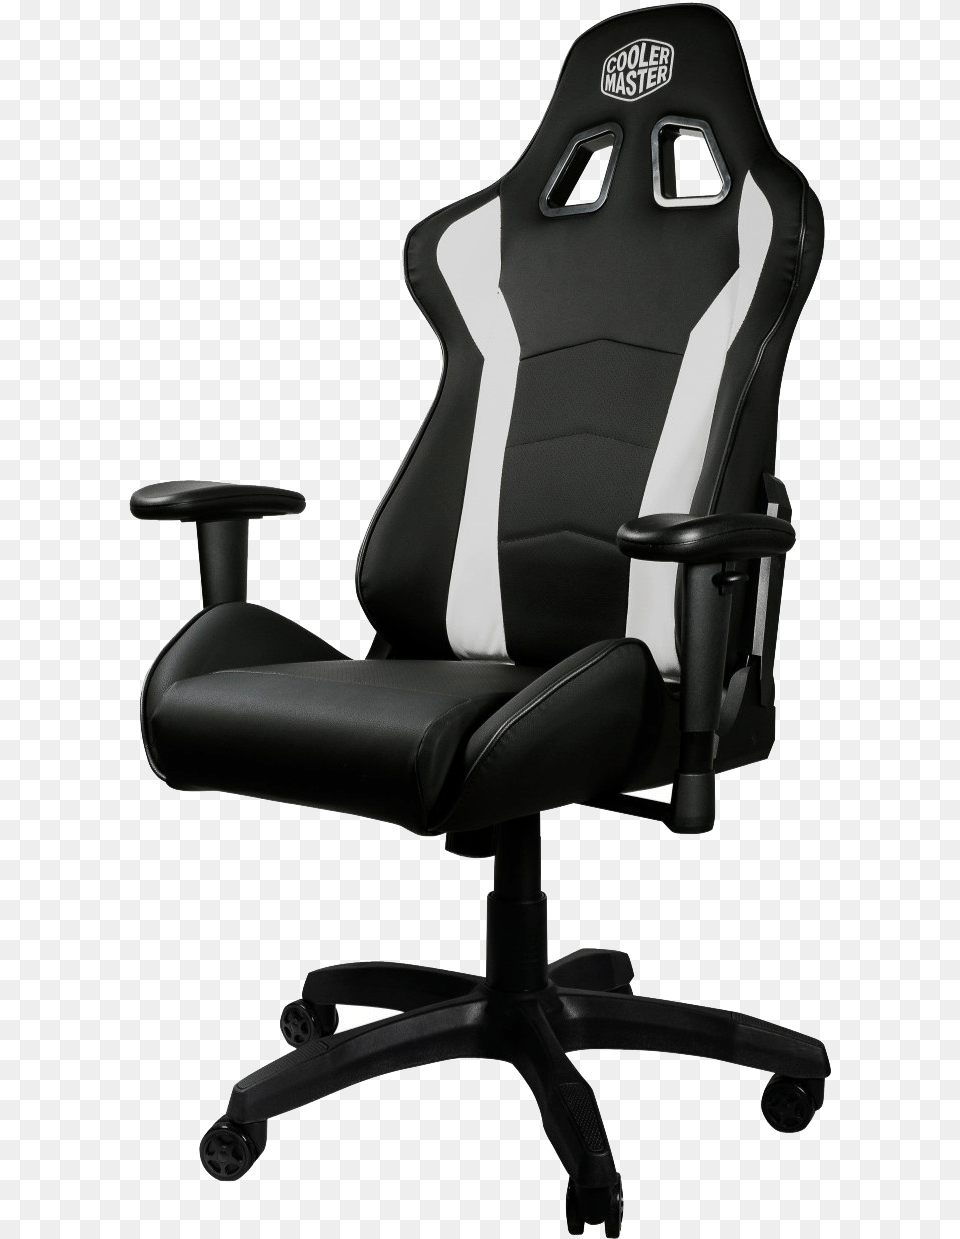 Cooler Master Gaming Caliber, Chair, Cushion, Furniture, Home Decor Png Image